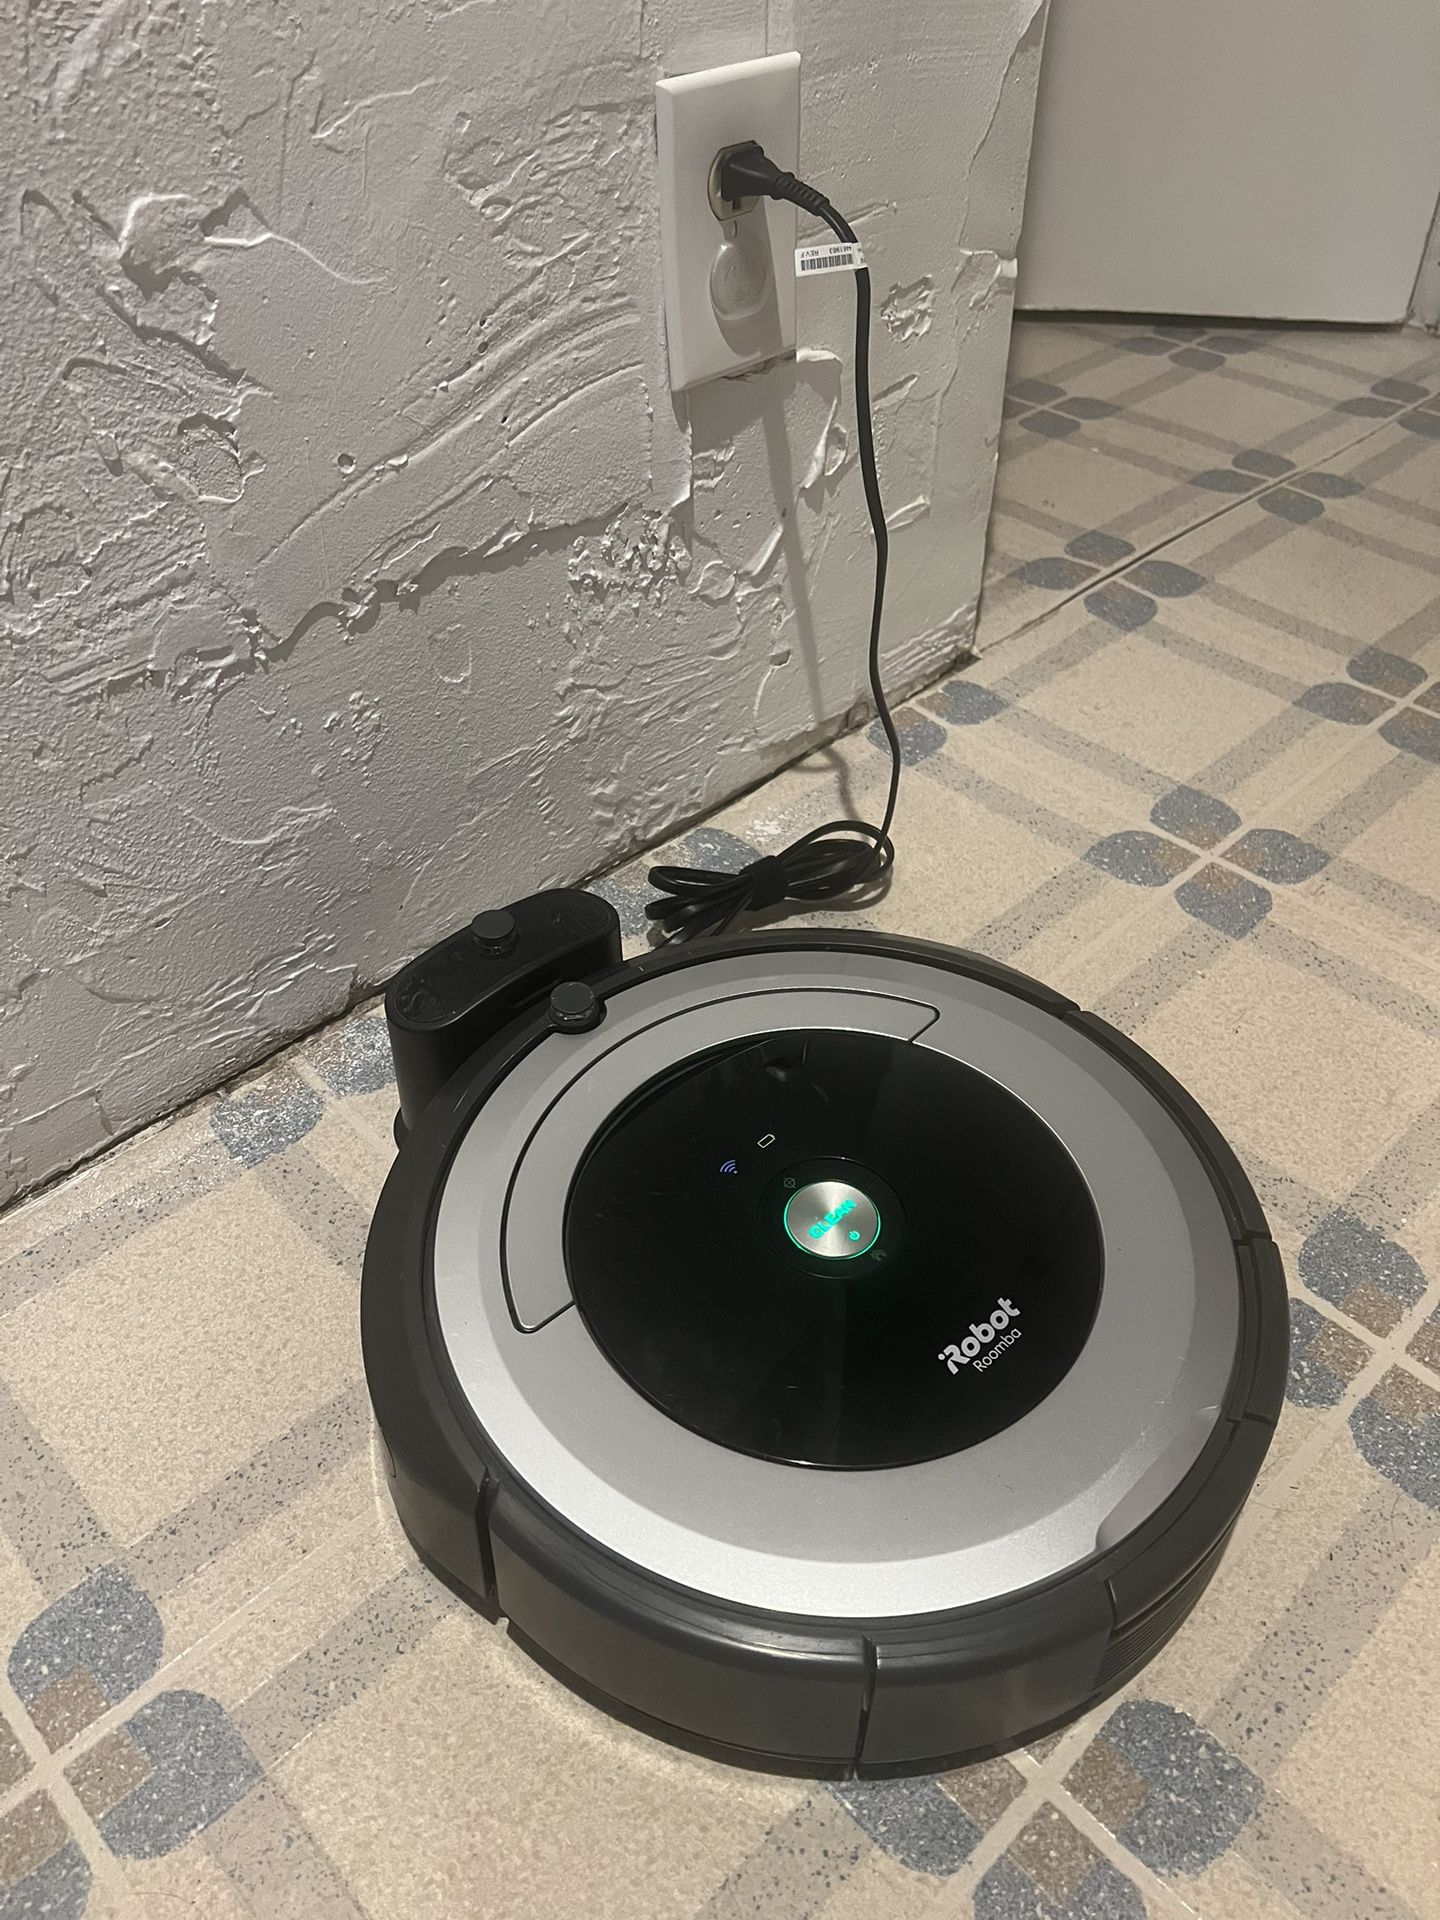 iRobot Roomba 690 Robot Vacuum Wi-Fi Connectivity, Works with